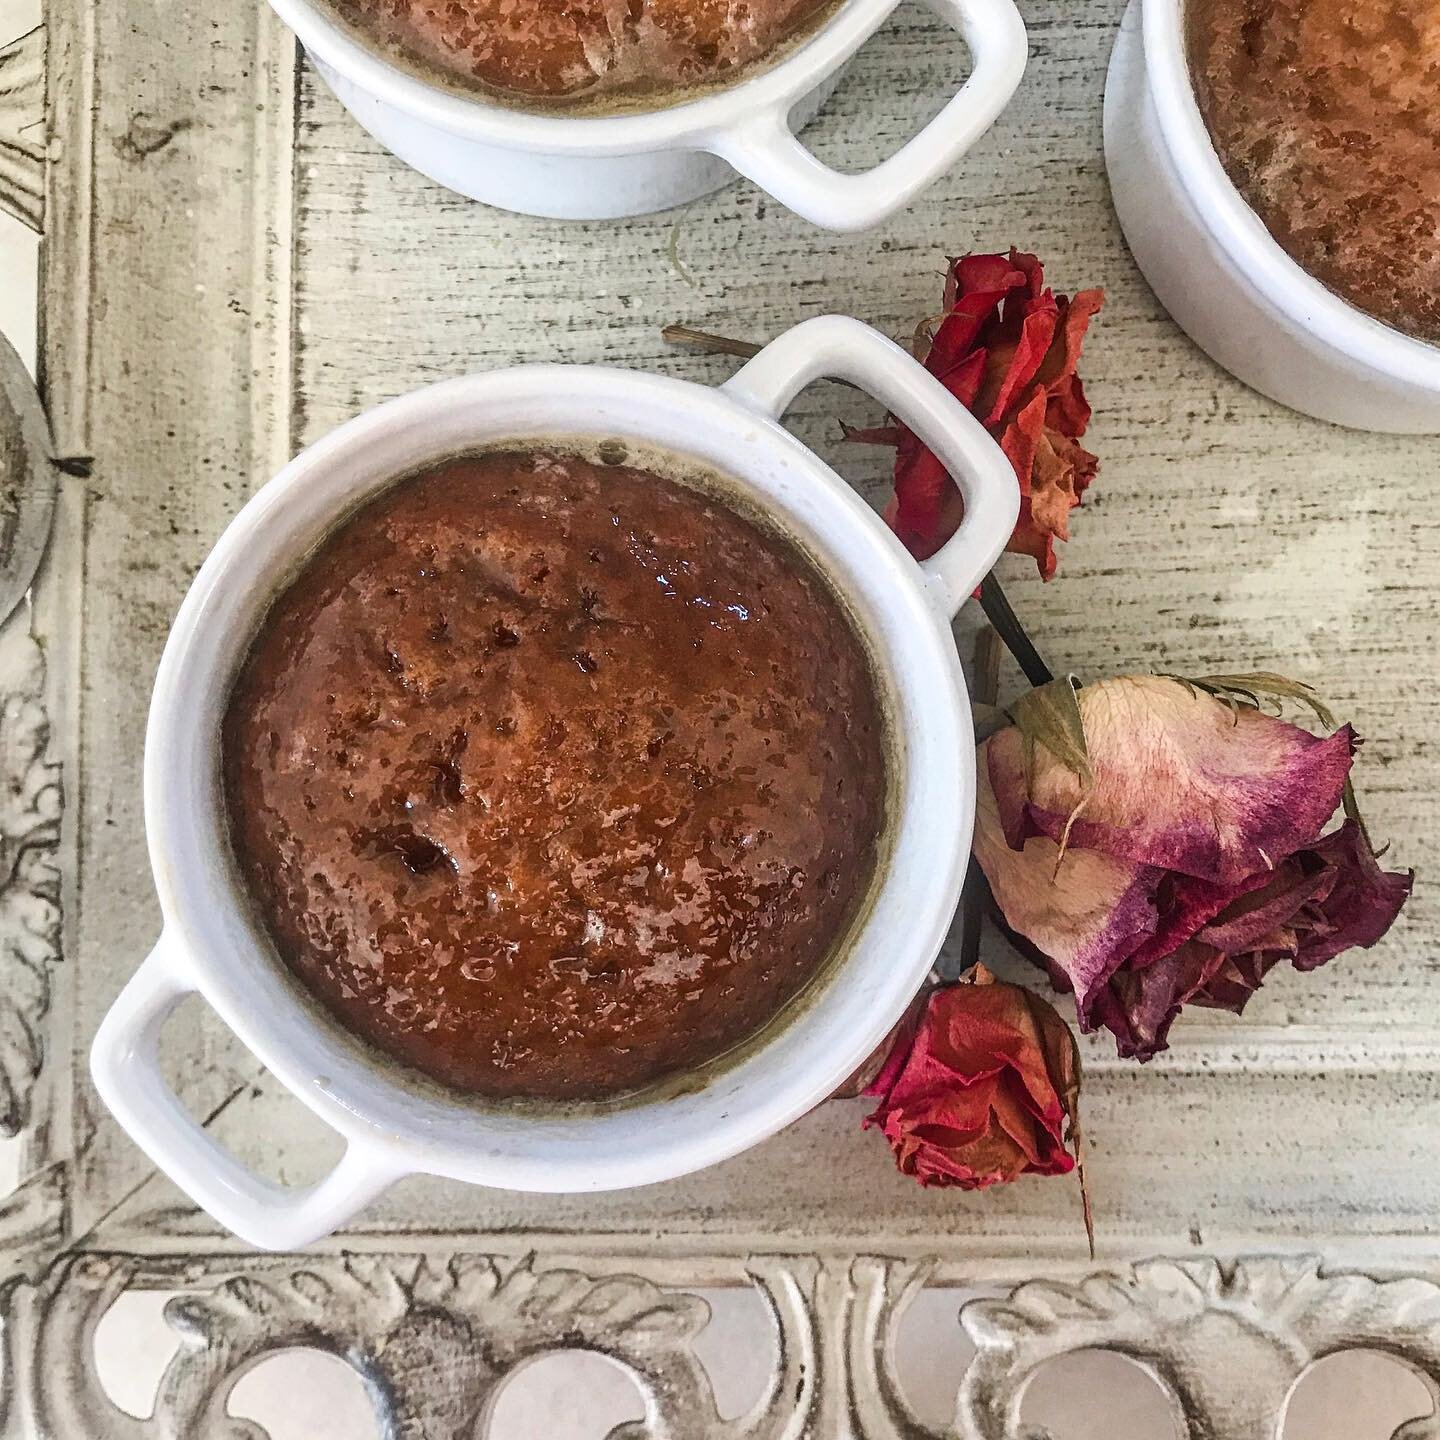 🇿🇦 #stayhome and visit South Africa through this Malva pudding from @claireshaban: &ldquo;With 11 official languages and more cultures than I think I can count, it was hard to choose a dish that really encapsulates South Africa. In Cape Town we hav